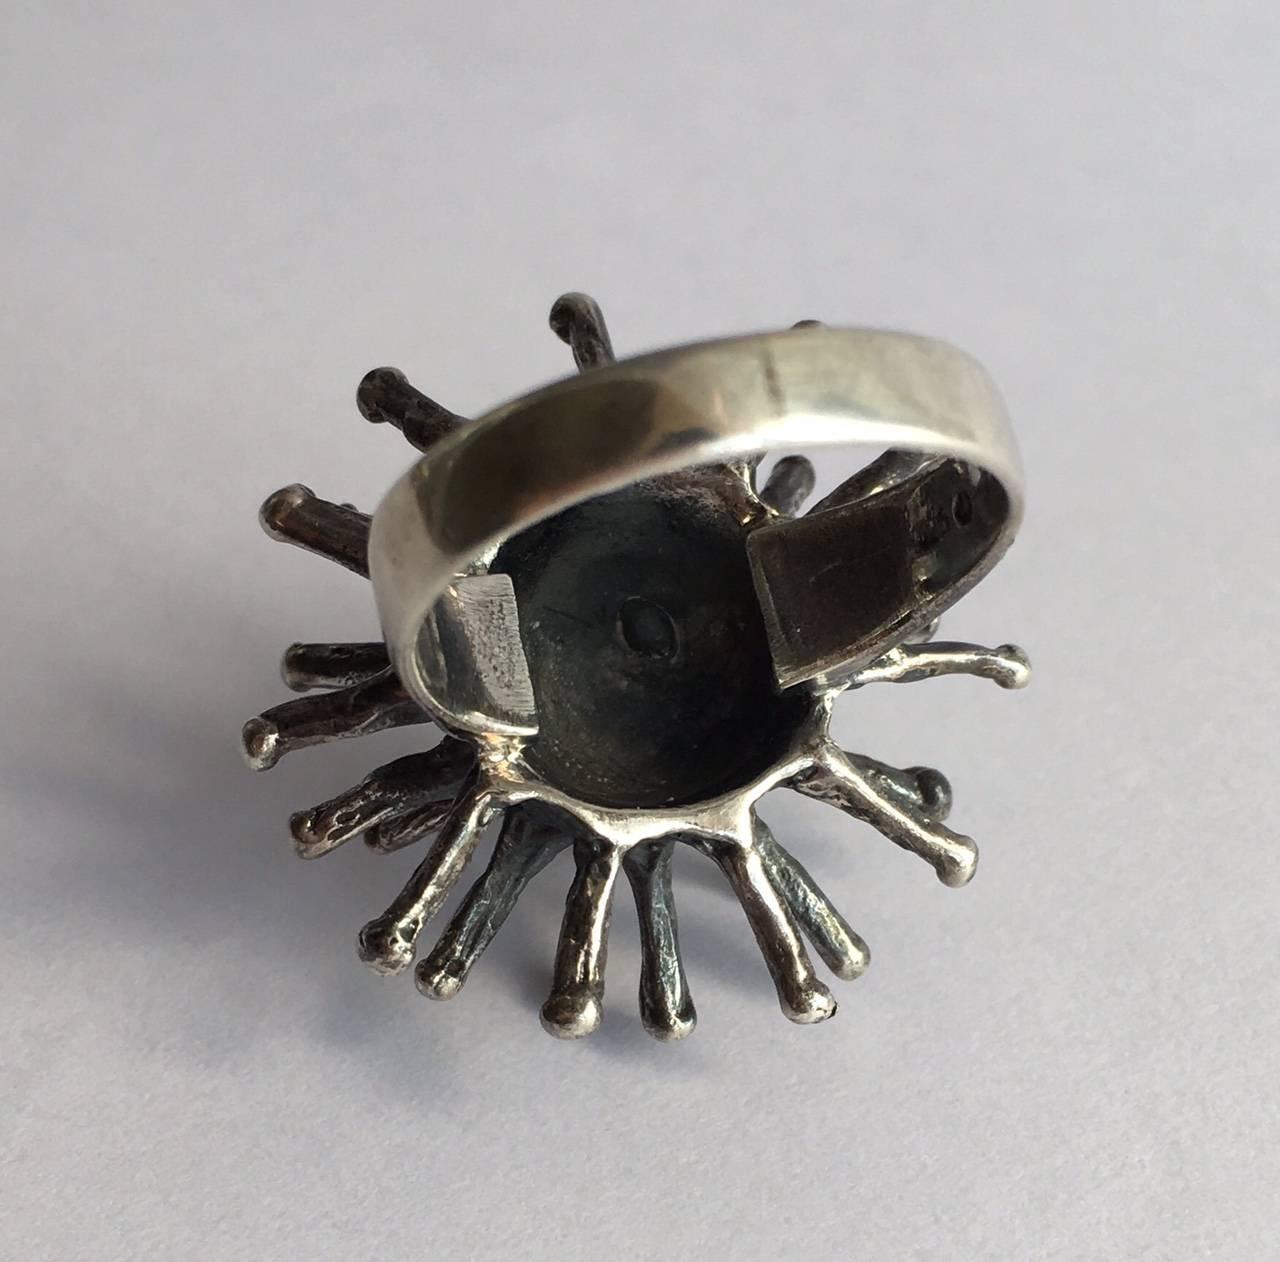 Vintage Jewelry Silver Flower Rings Abstract Starburst Sculpture Architectural 4